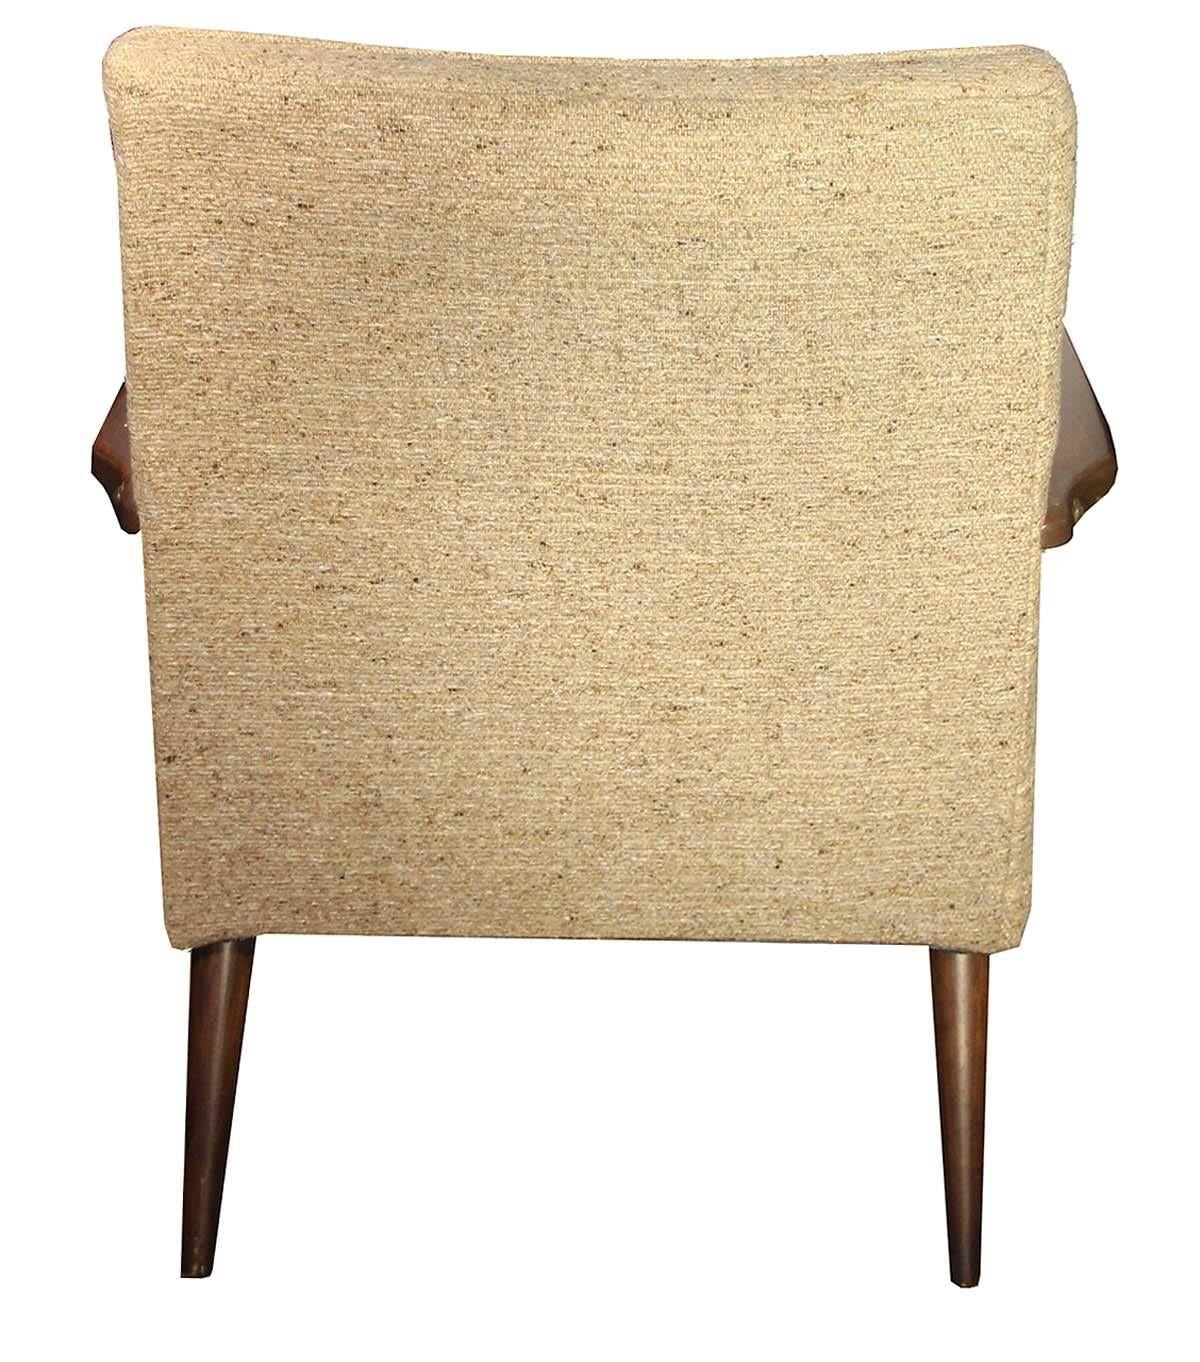 20th Century Pair of Midcentury Upholstered Chairs